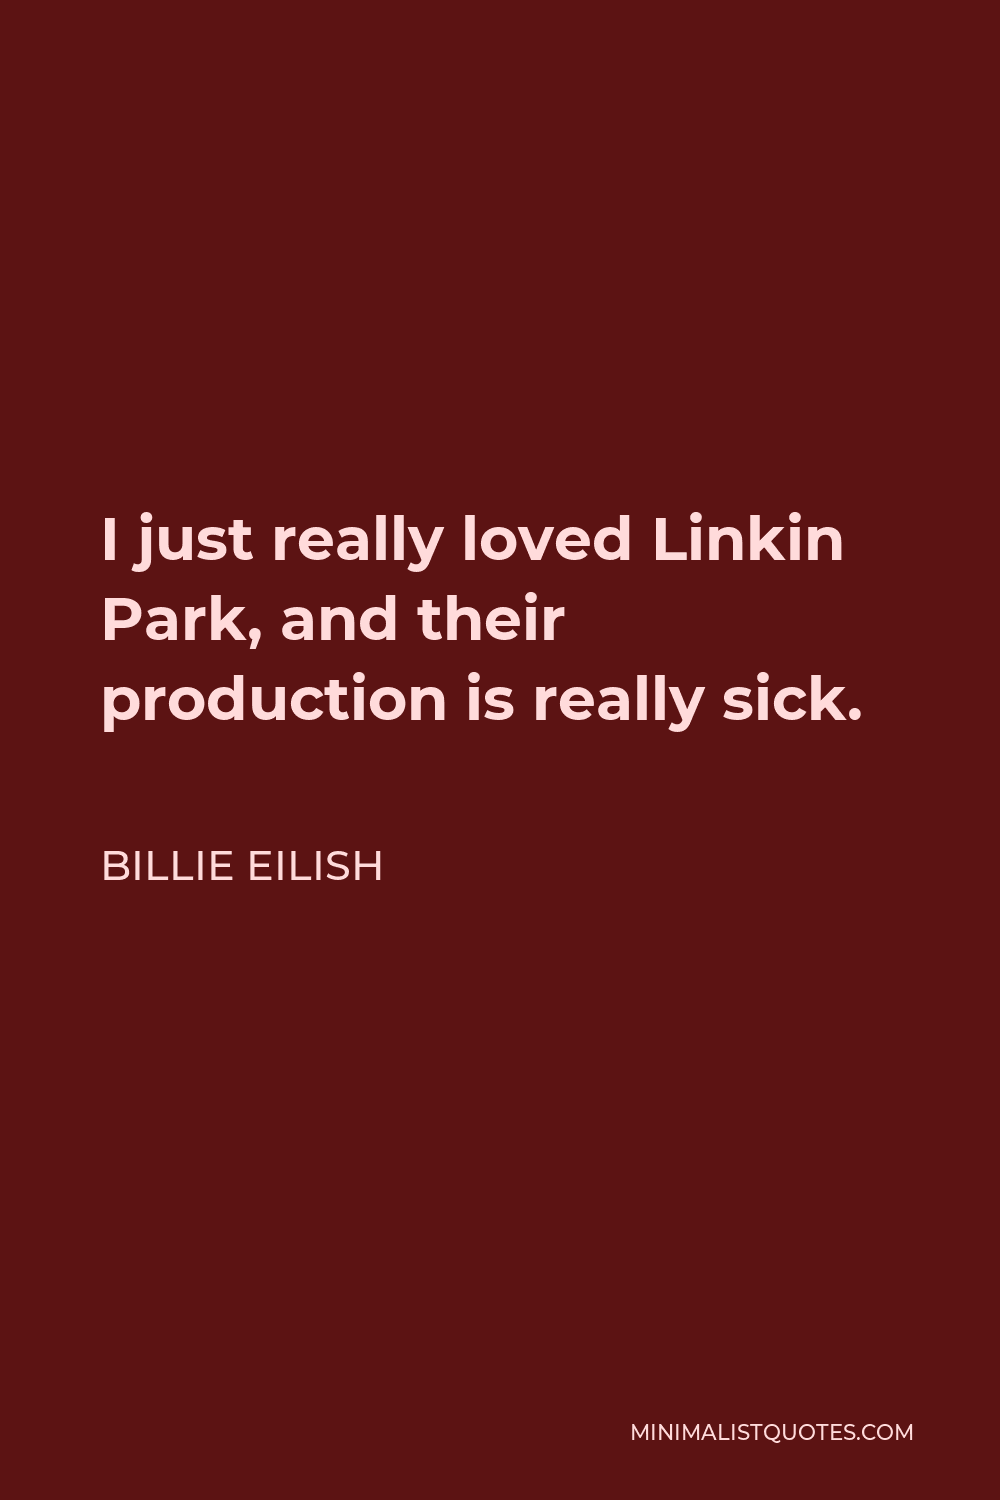 Billie Eilish Quote - I just really loved Linkin Park, and their production is really sick.